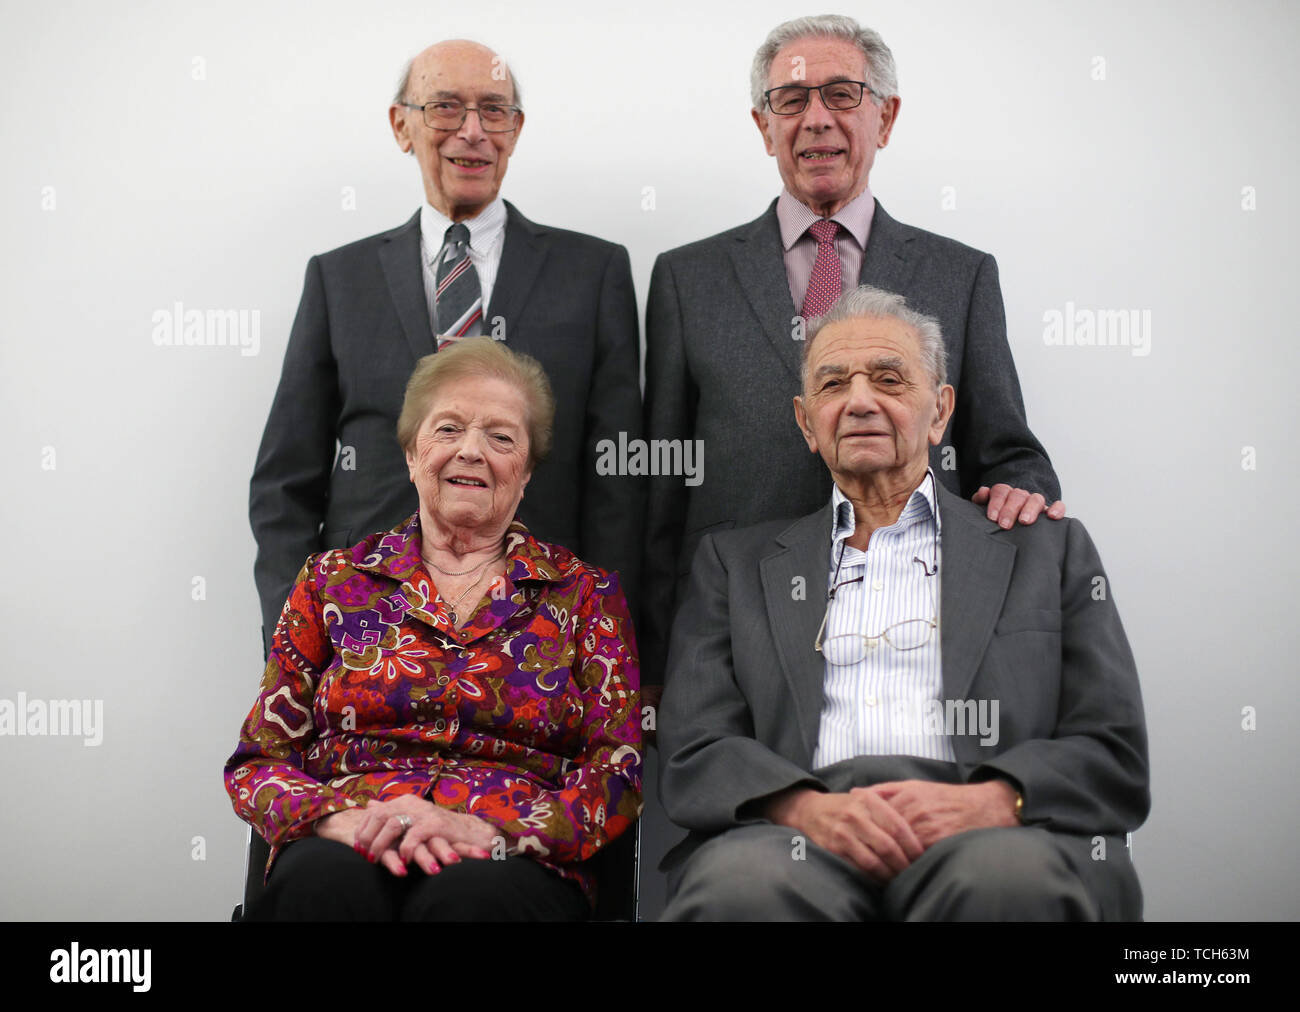 Udelade mikroskop Kan ikke lide clockwise from top left) Holocaust survivors George Hans Vulkan, Ernest  Simon, Walter Kammerling and Ruzena Levy, at the Jewish Museum London, they  will receive a British Empire Medal in the Queen's Birthday